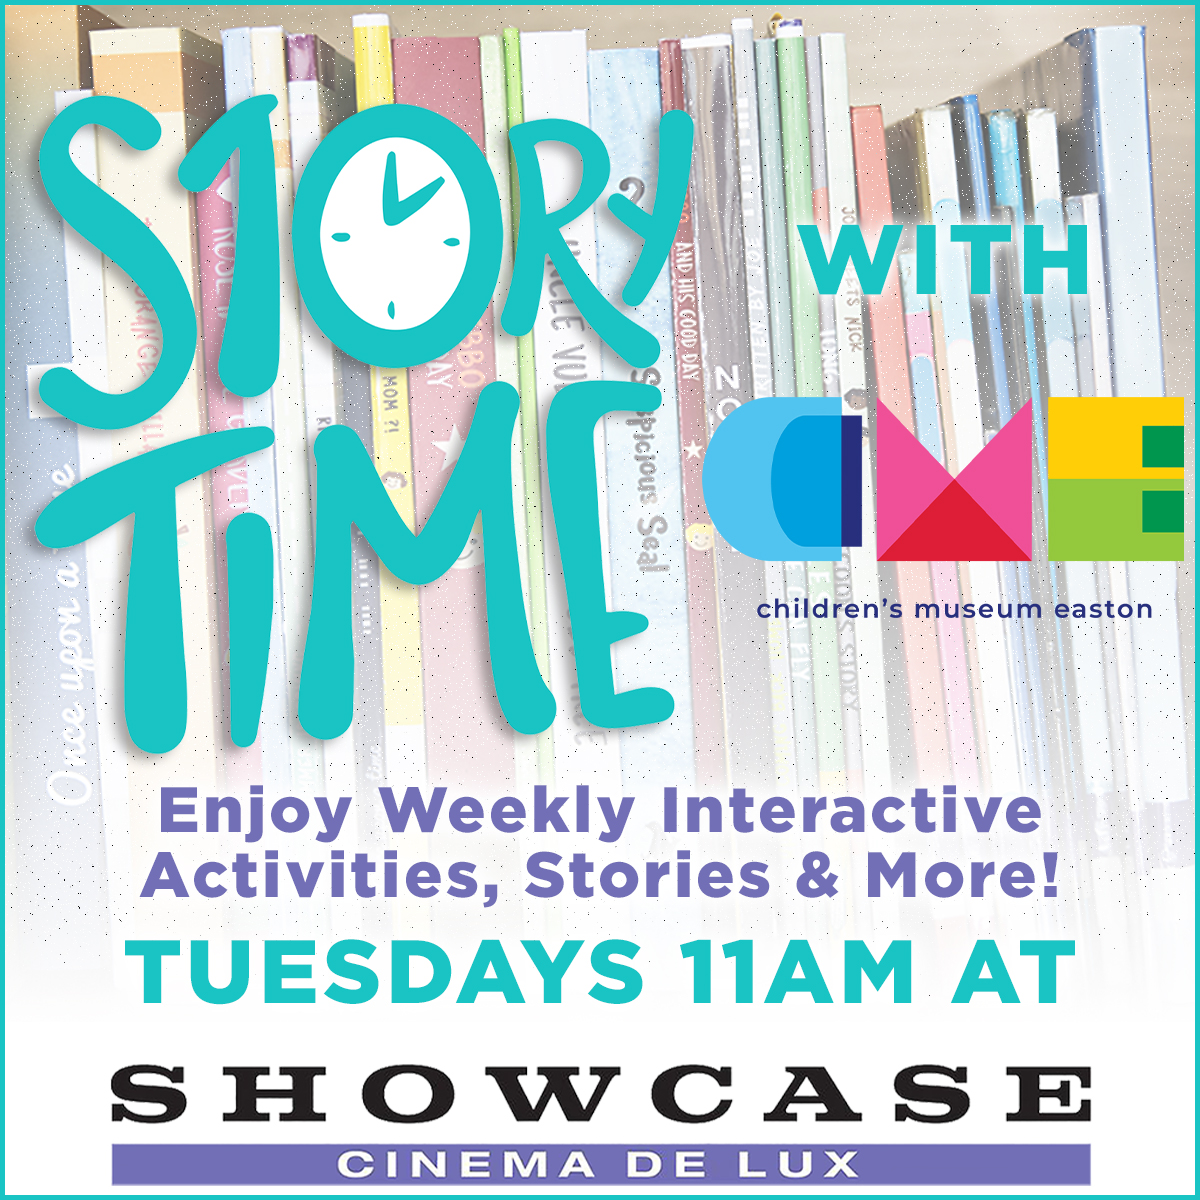 Storytime with CME at Showcase Cinema de Lux